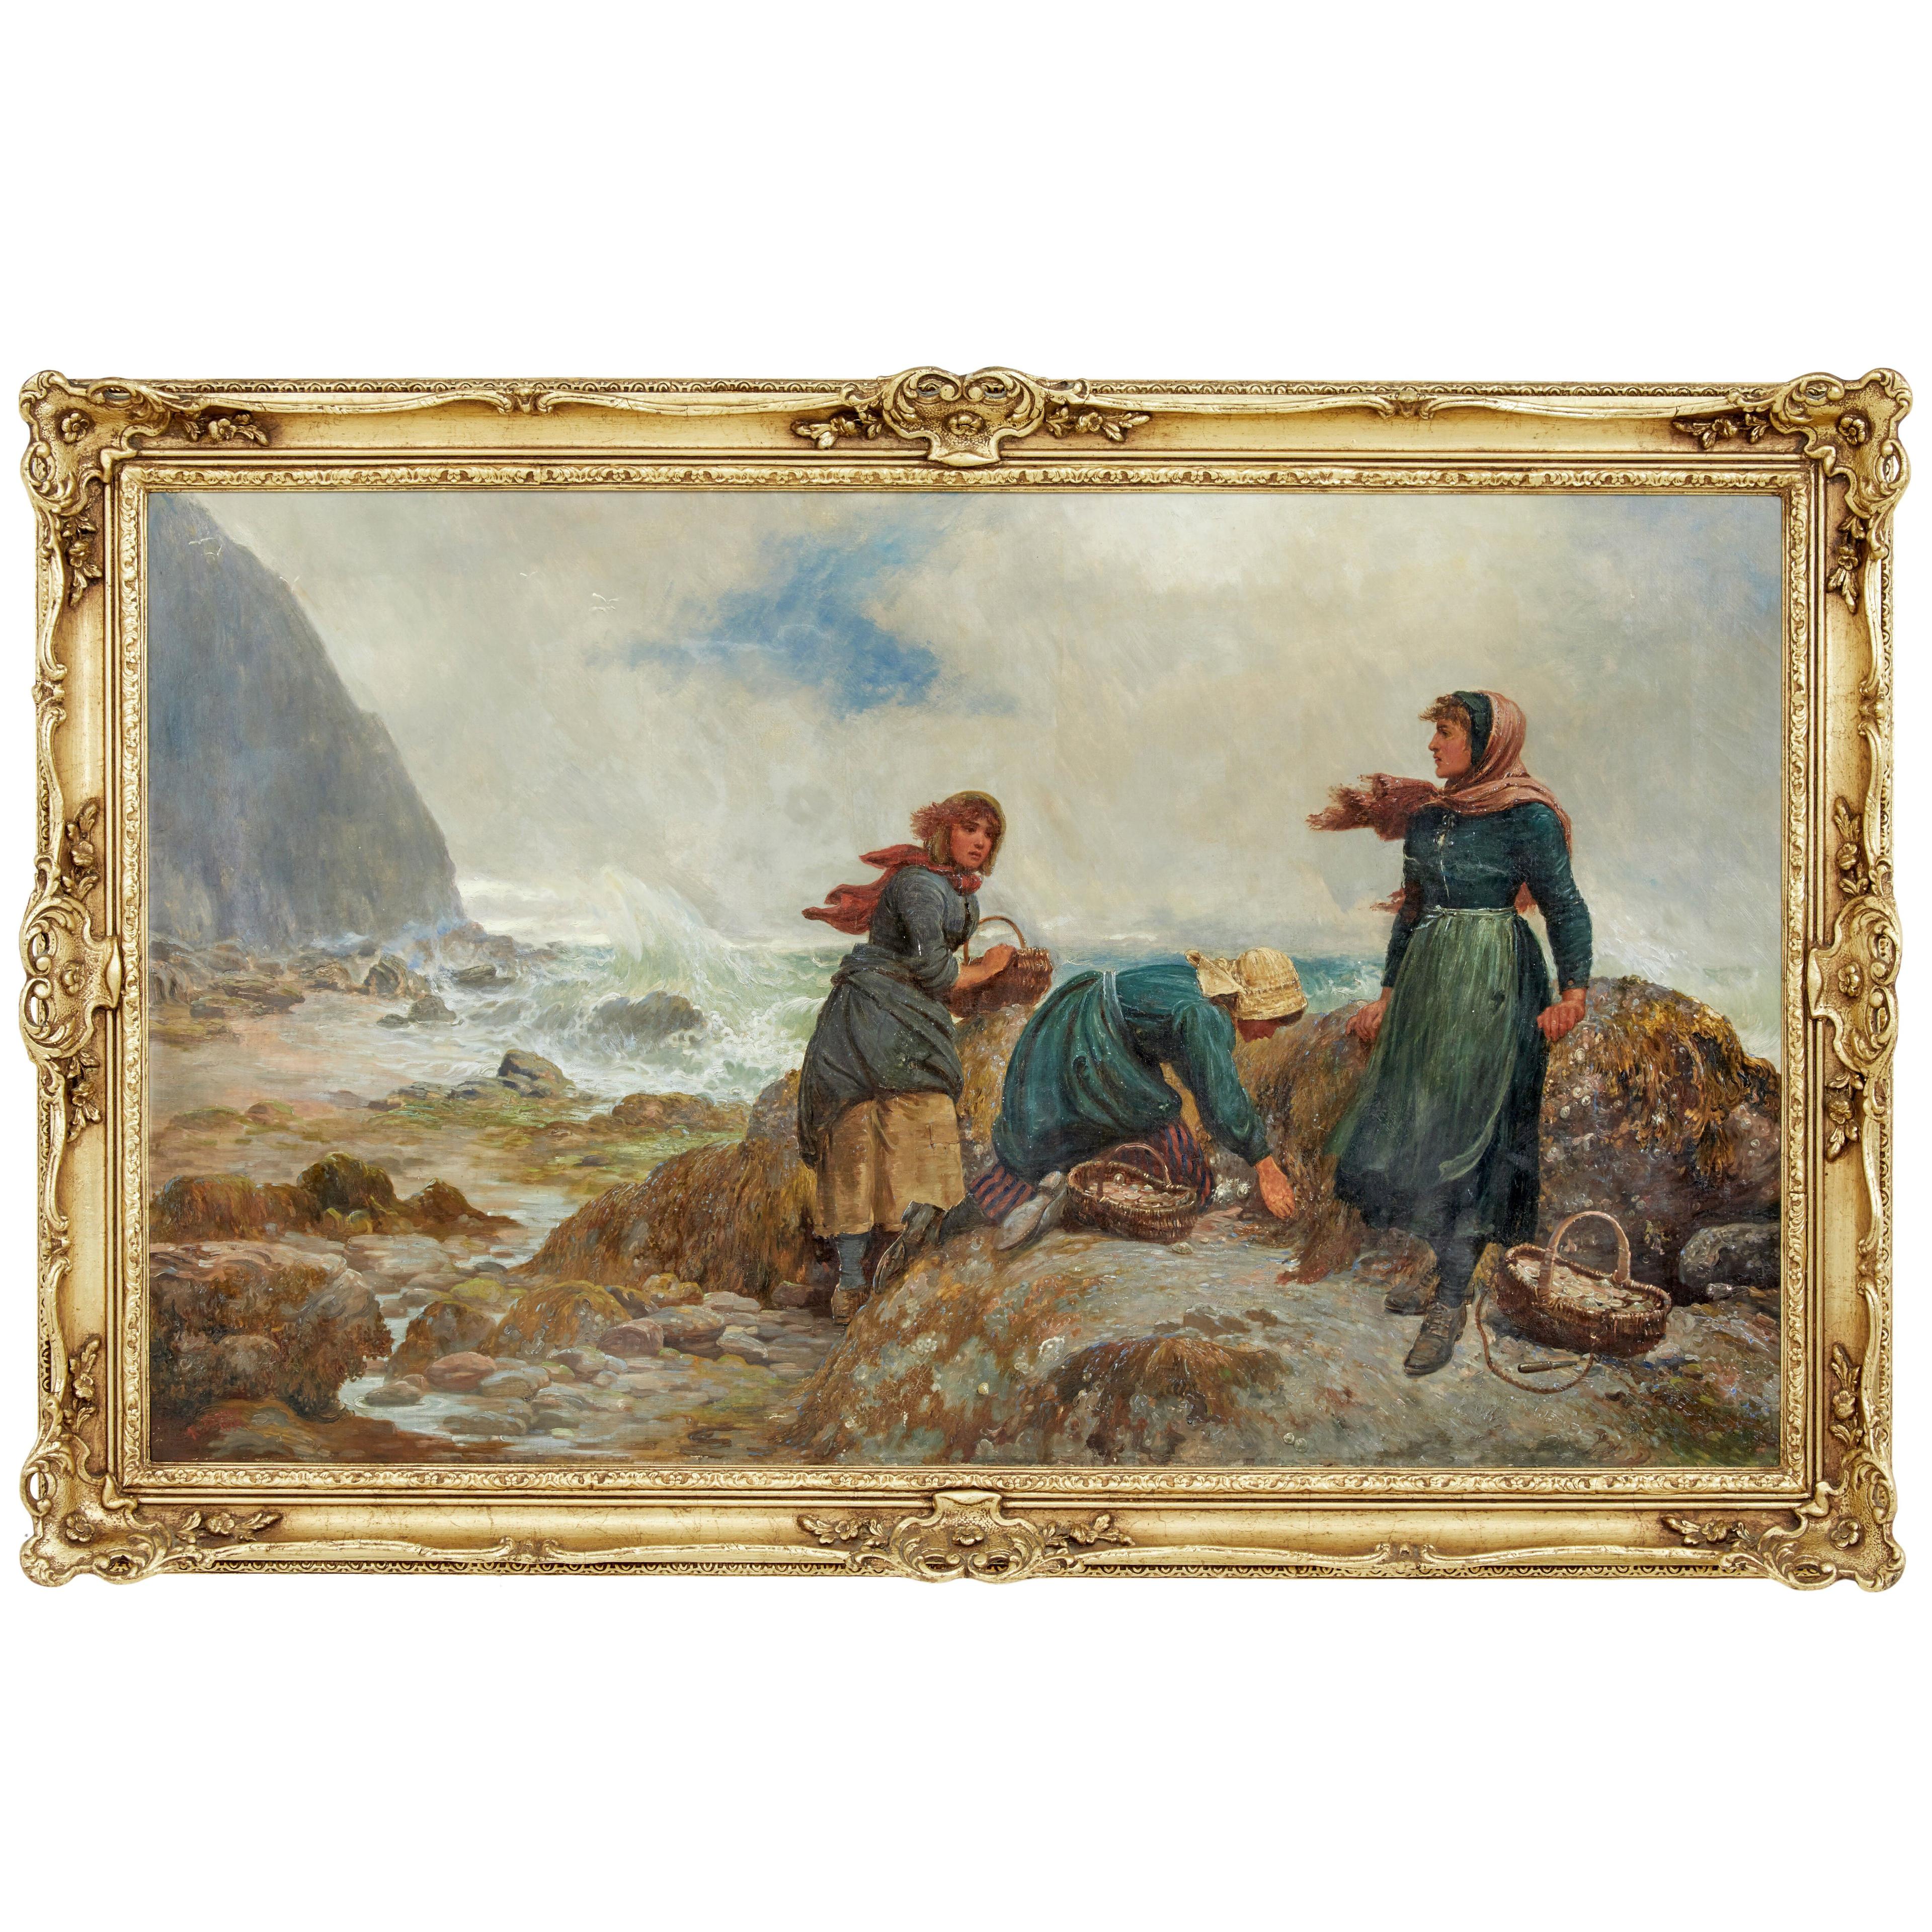 19TH CENTURY OIL PAINTING OF YORKSHIRE FLITHER PICKERS BY ROBERT FARREN